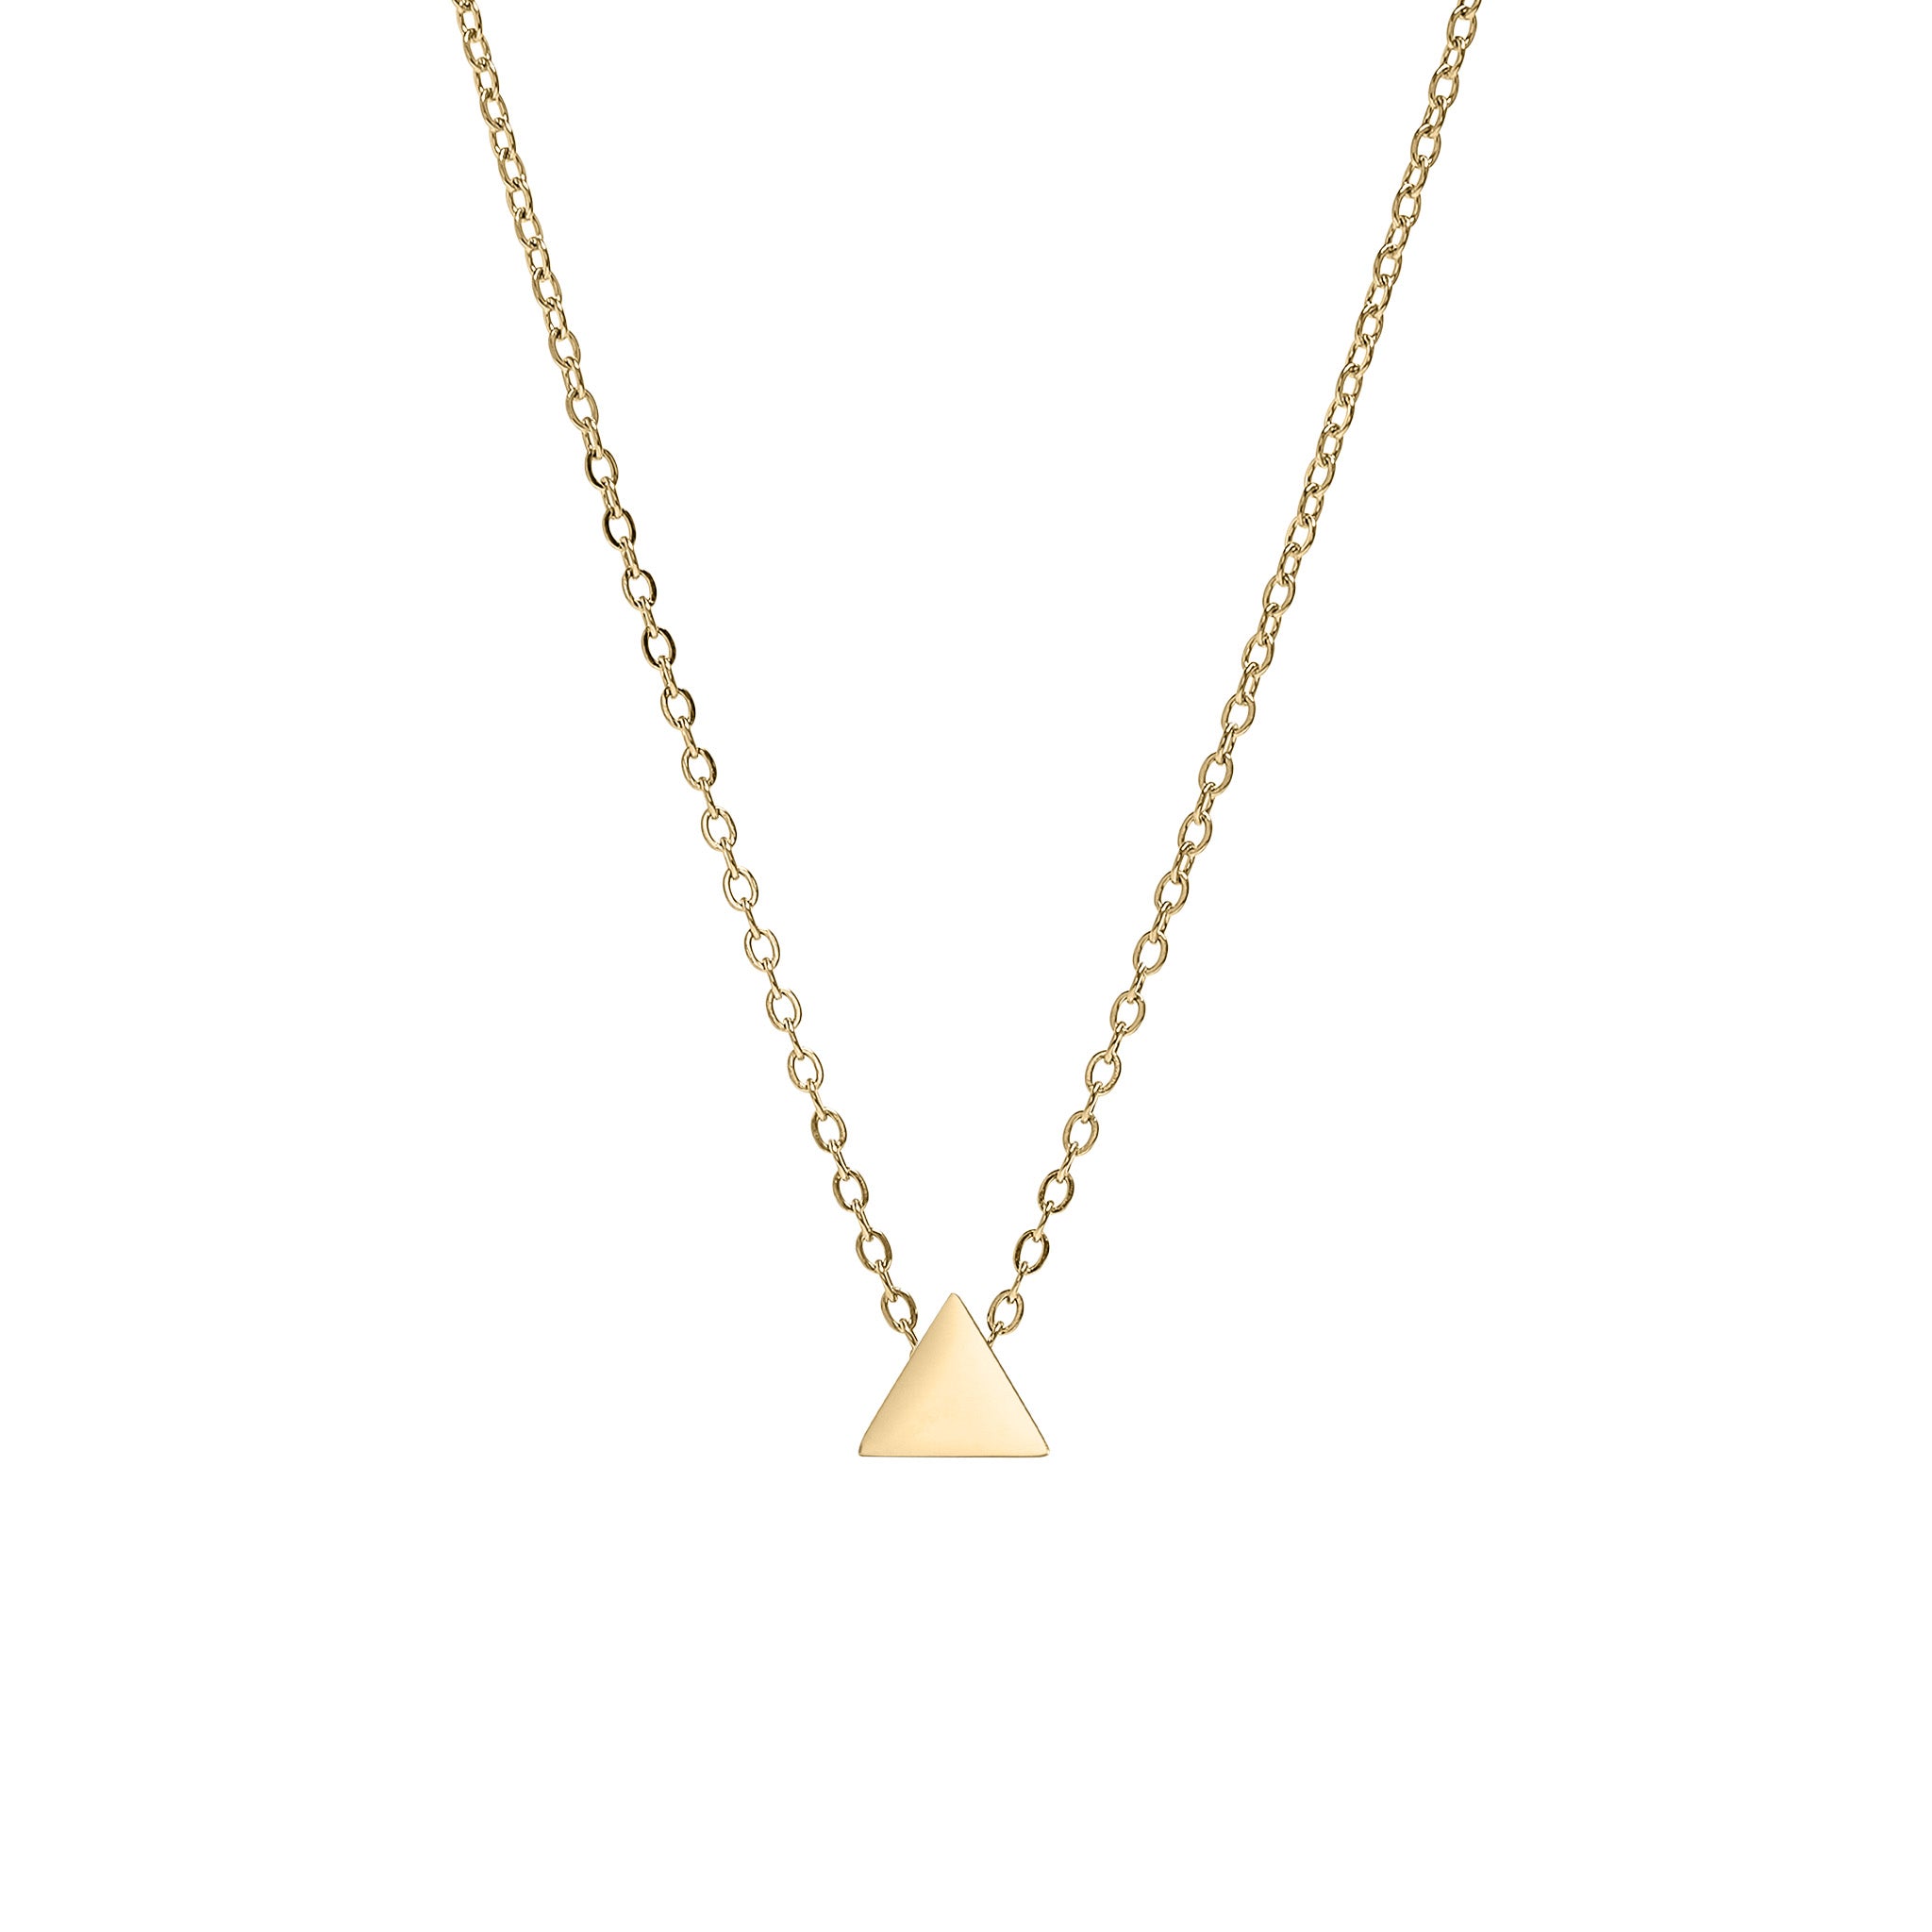 Stainless Steel Mini Triangle Necklace / SBB0345